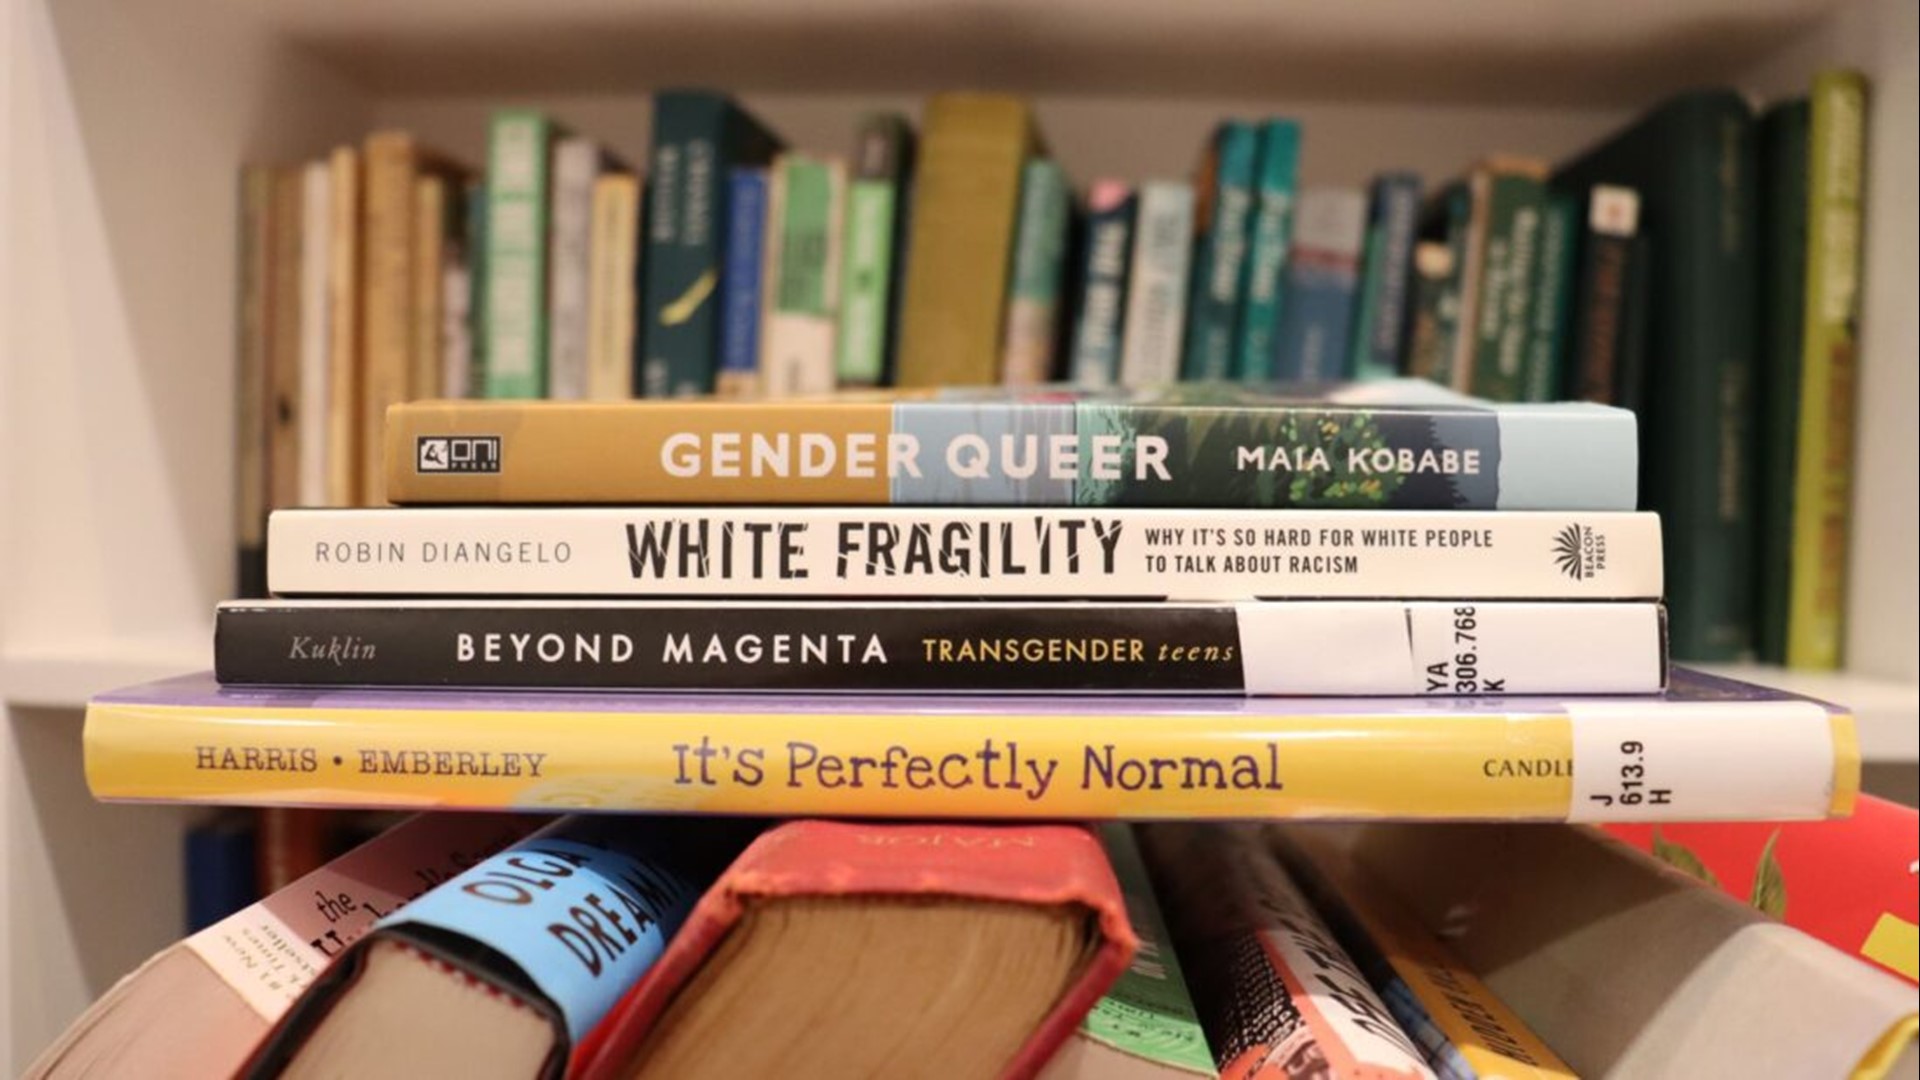 Most complaints target LGBTQ+ books, a Maine Monitor review found. Some rely on resources from national conservative organizations.